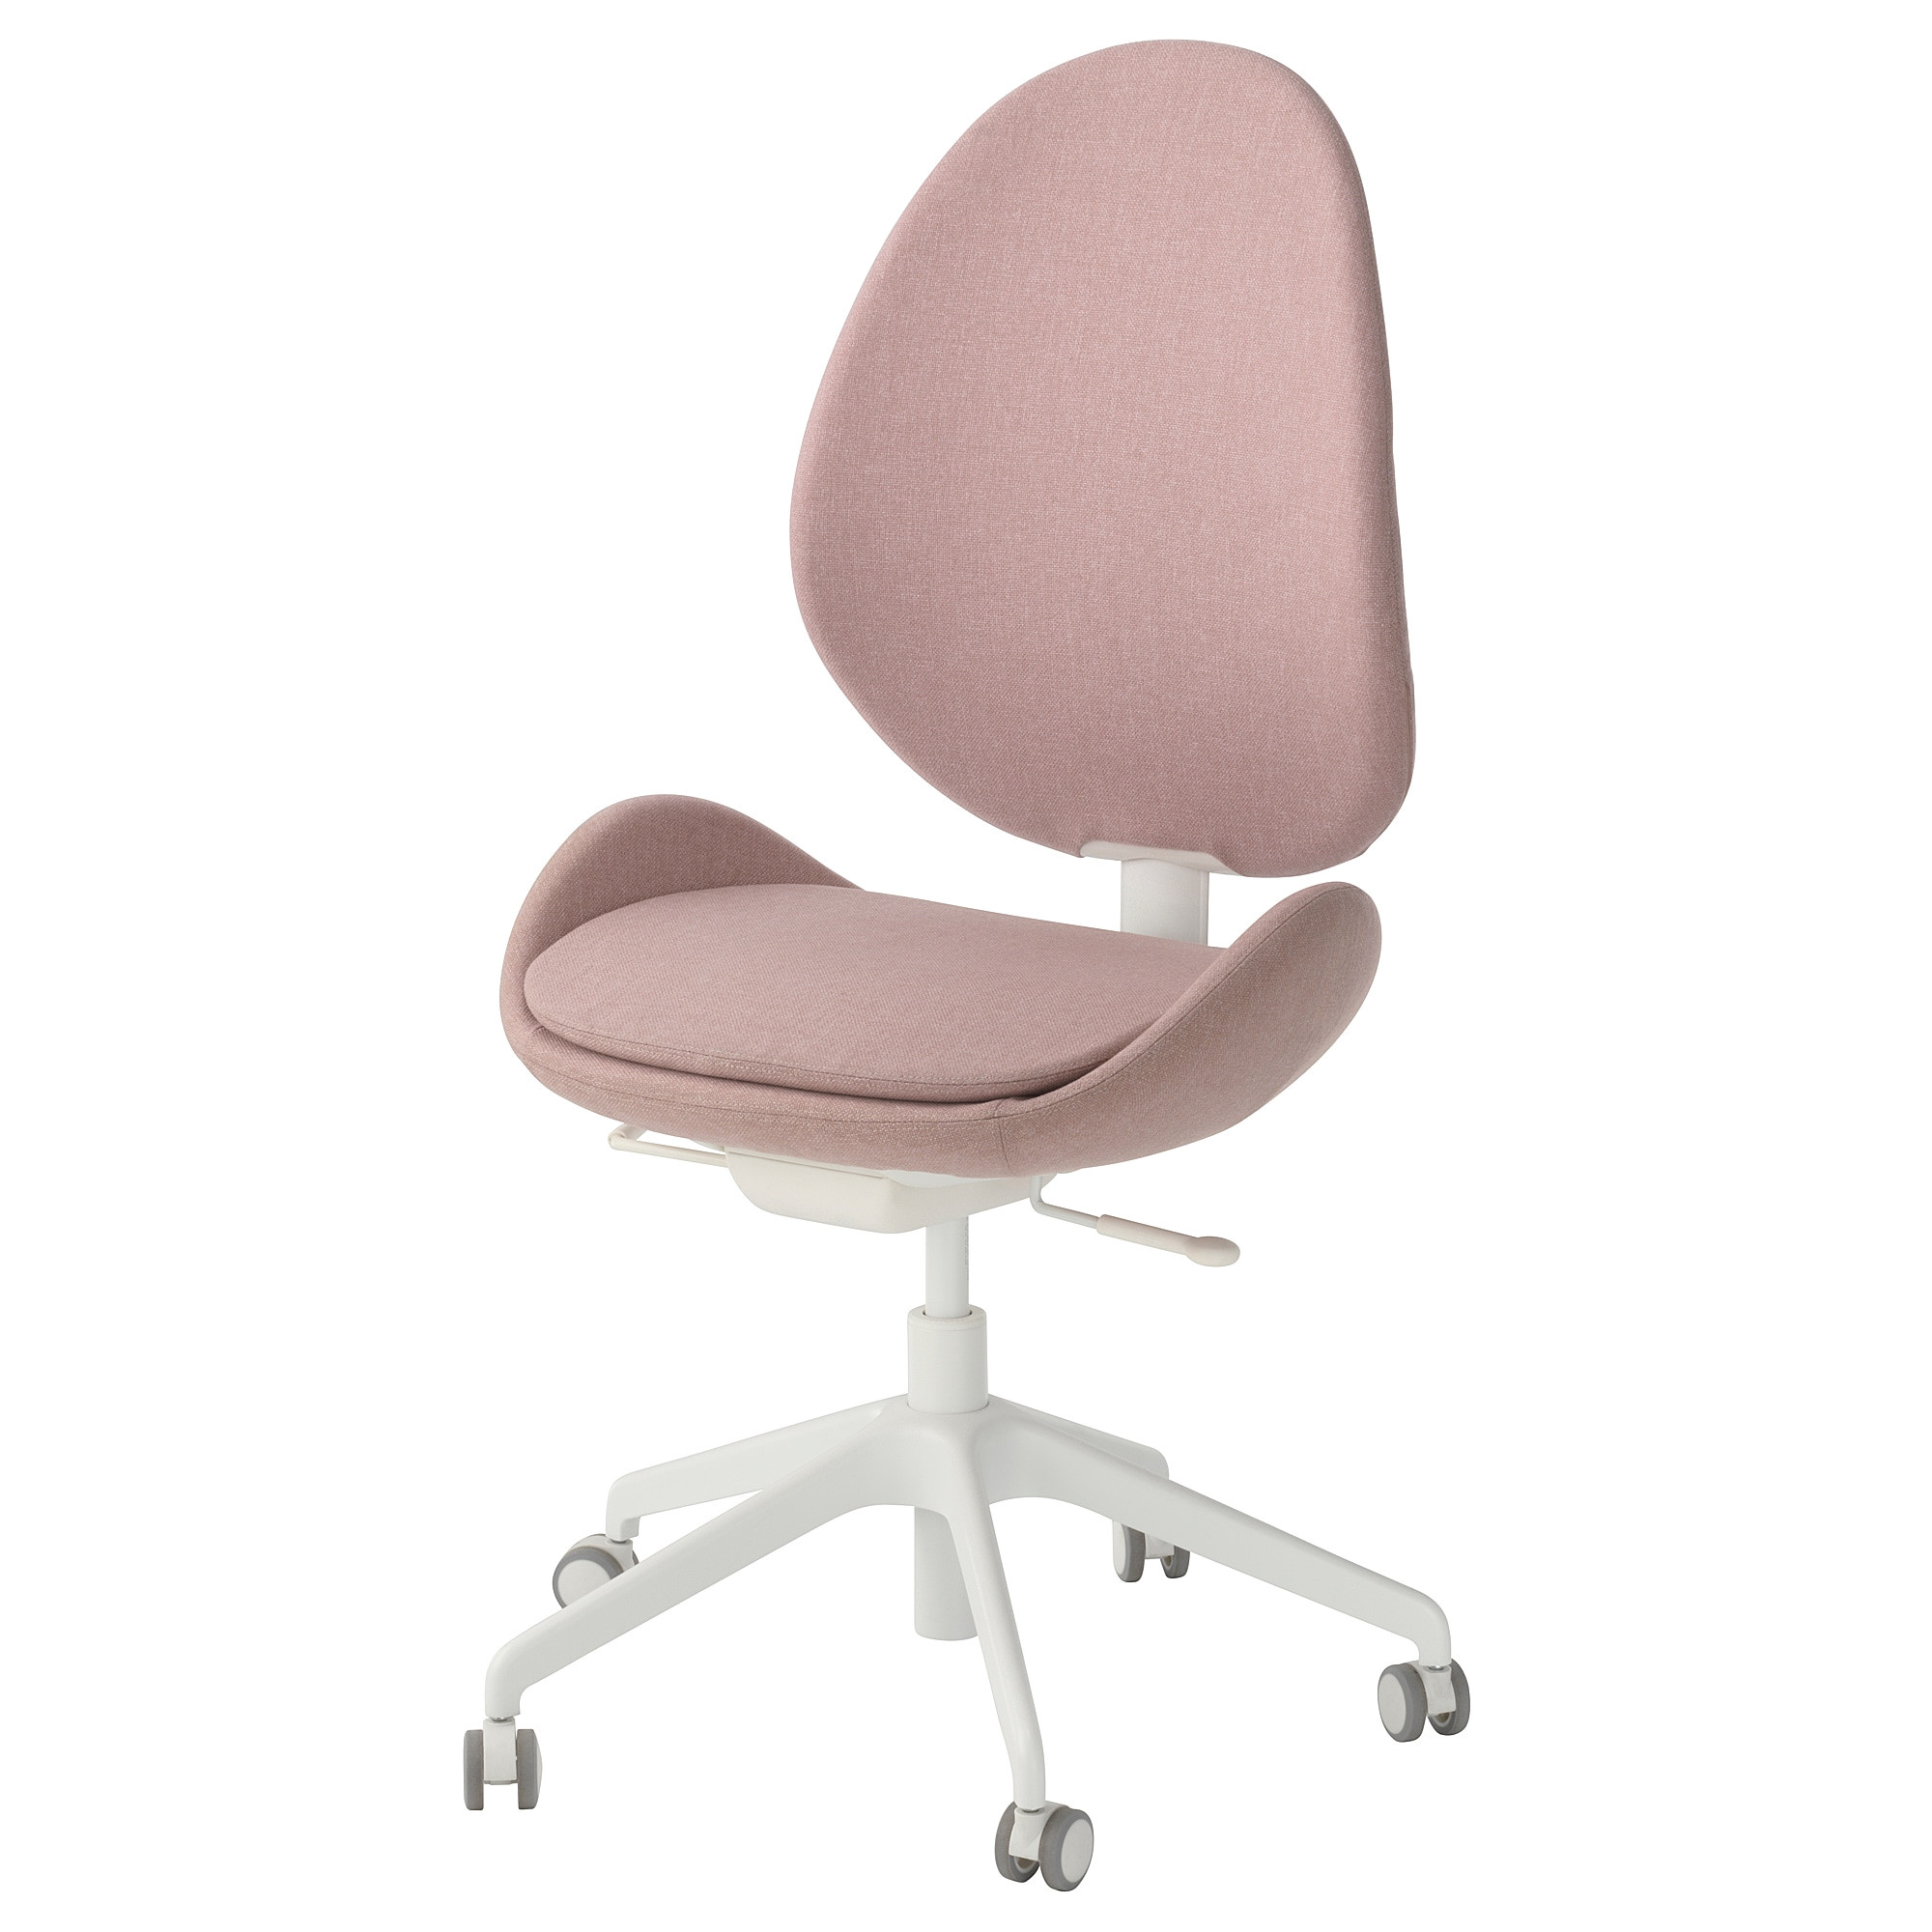 ikea hattefja ll swivel chair 10 year guarantee read about the terms in the guarantee brochure